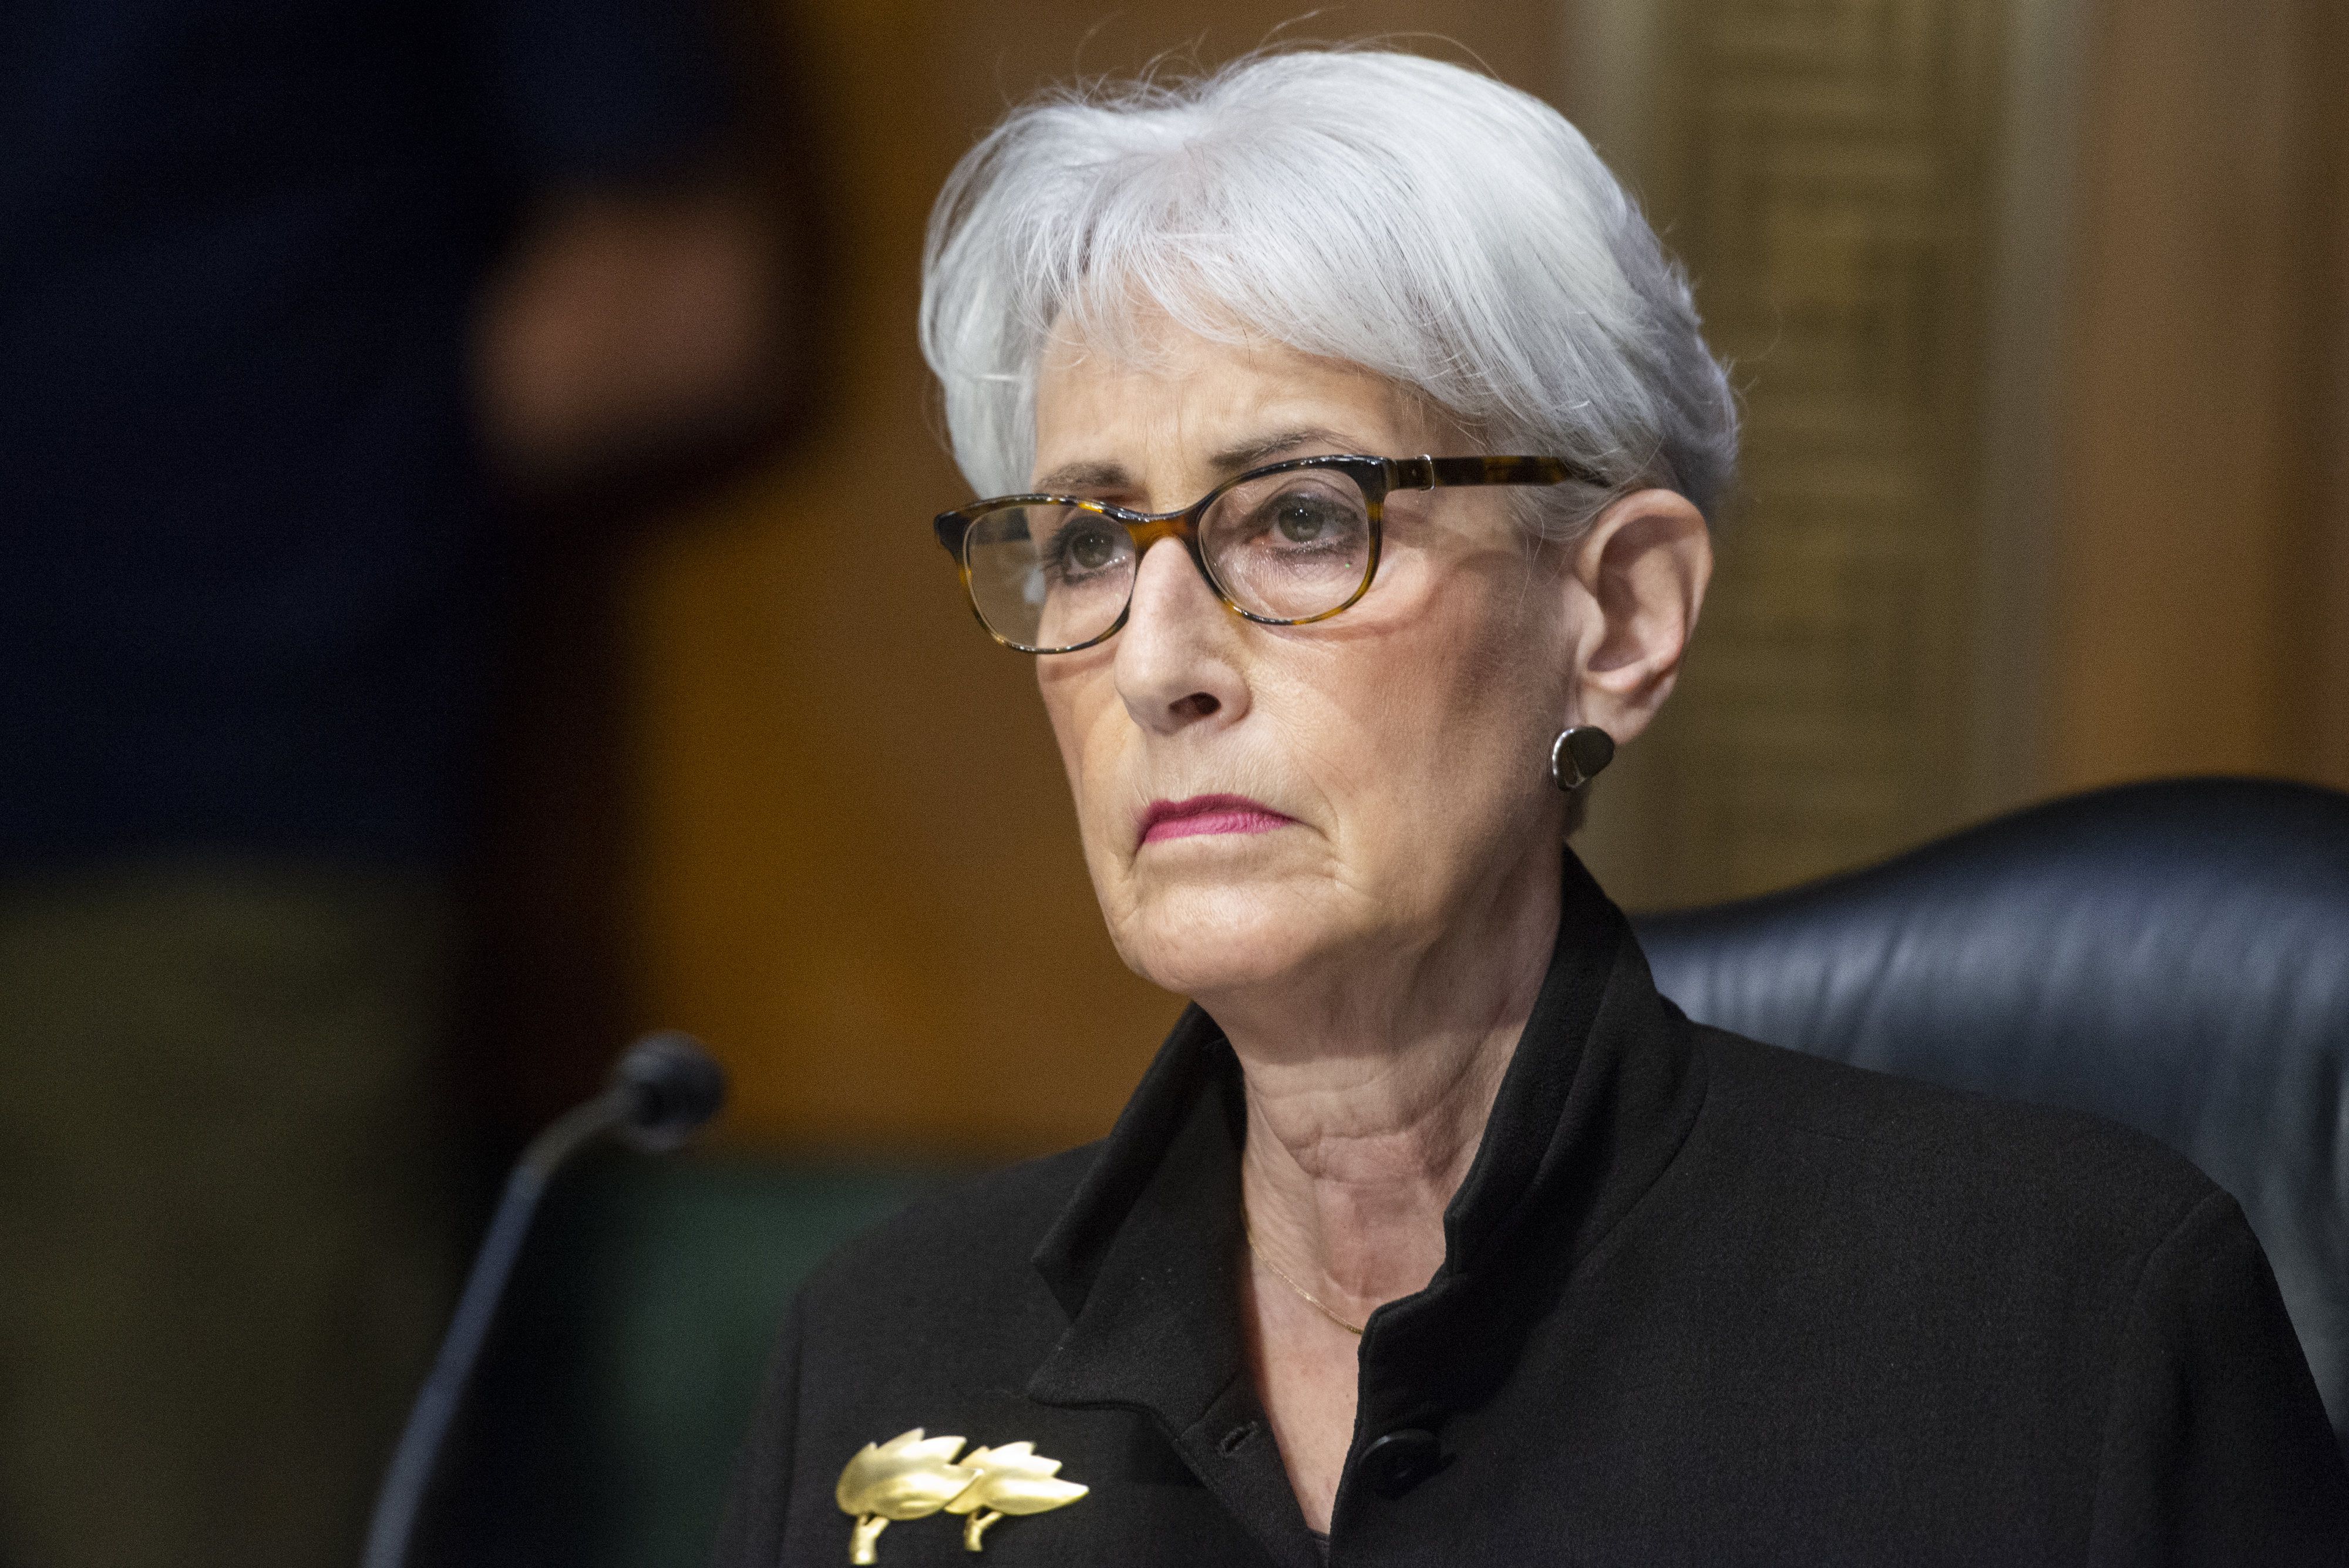 03-08-2021 August 3, 2021, Washington, District of Columbia, USA: Wendy Sherman, Deputy Secretary of State, appears before a Senate Committee on Foreign Relations hearing to examine authorizations of use of force, focusing on administration perspectives, in the Dirksen Senate Office Building in Washington, DC, Tuesday, August 3, 2021. Credit: Rod Lamkey / CNP POLITICA Europa Press/Contacto/Rod Lamkey - Cnp 